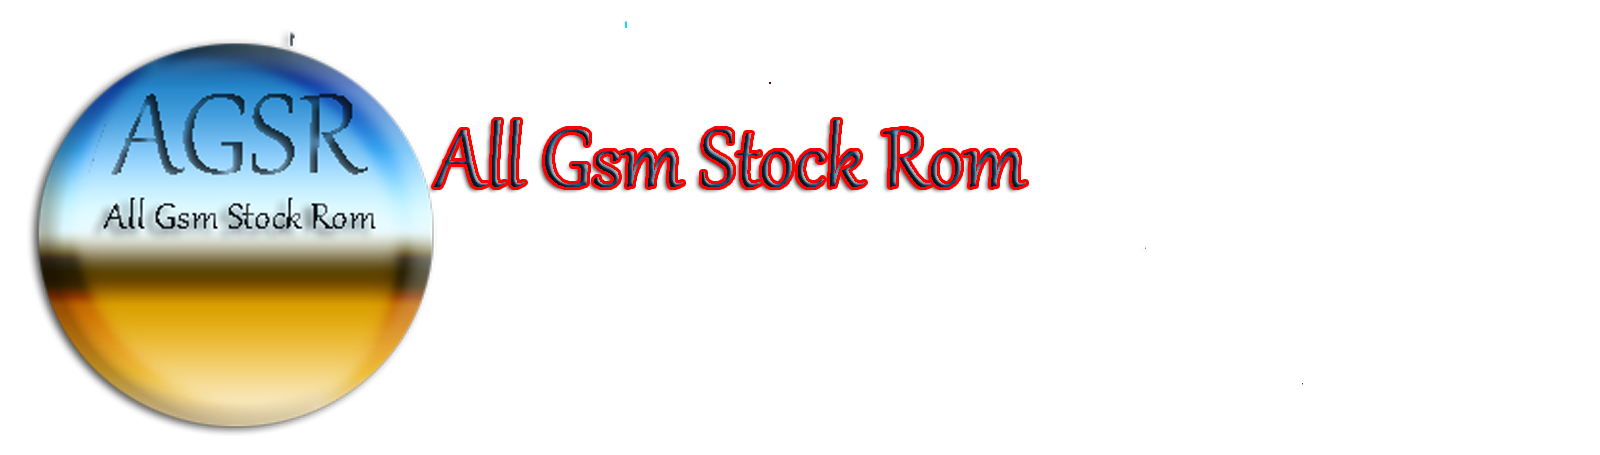 All Gsm Stock Rom